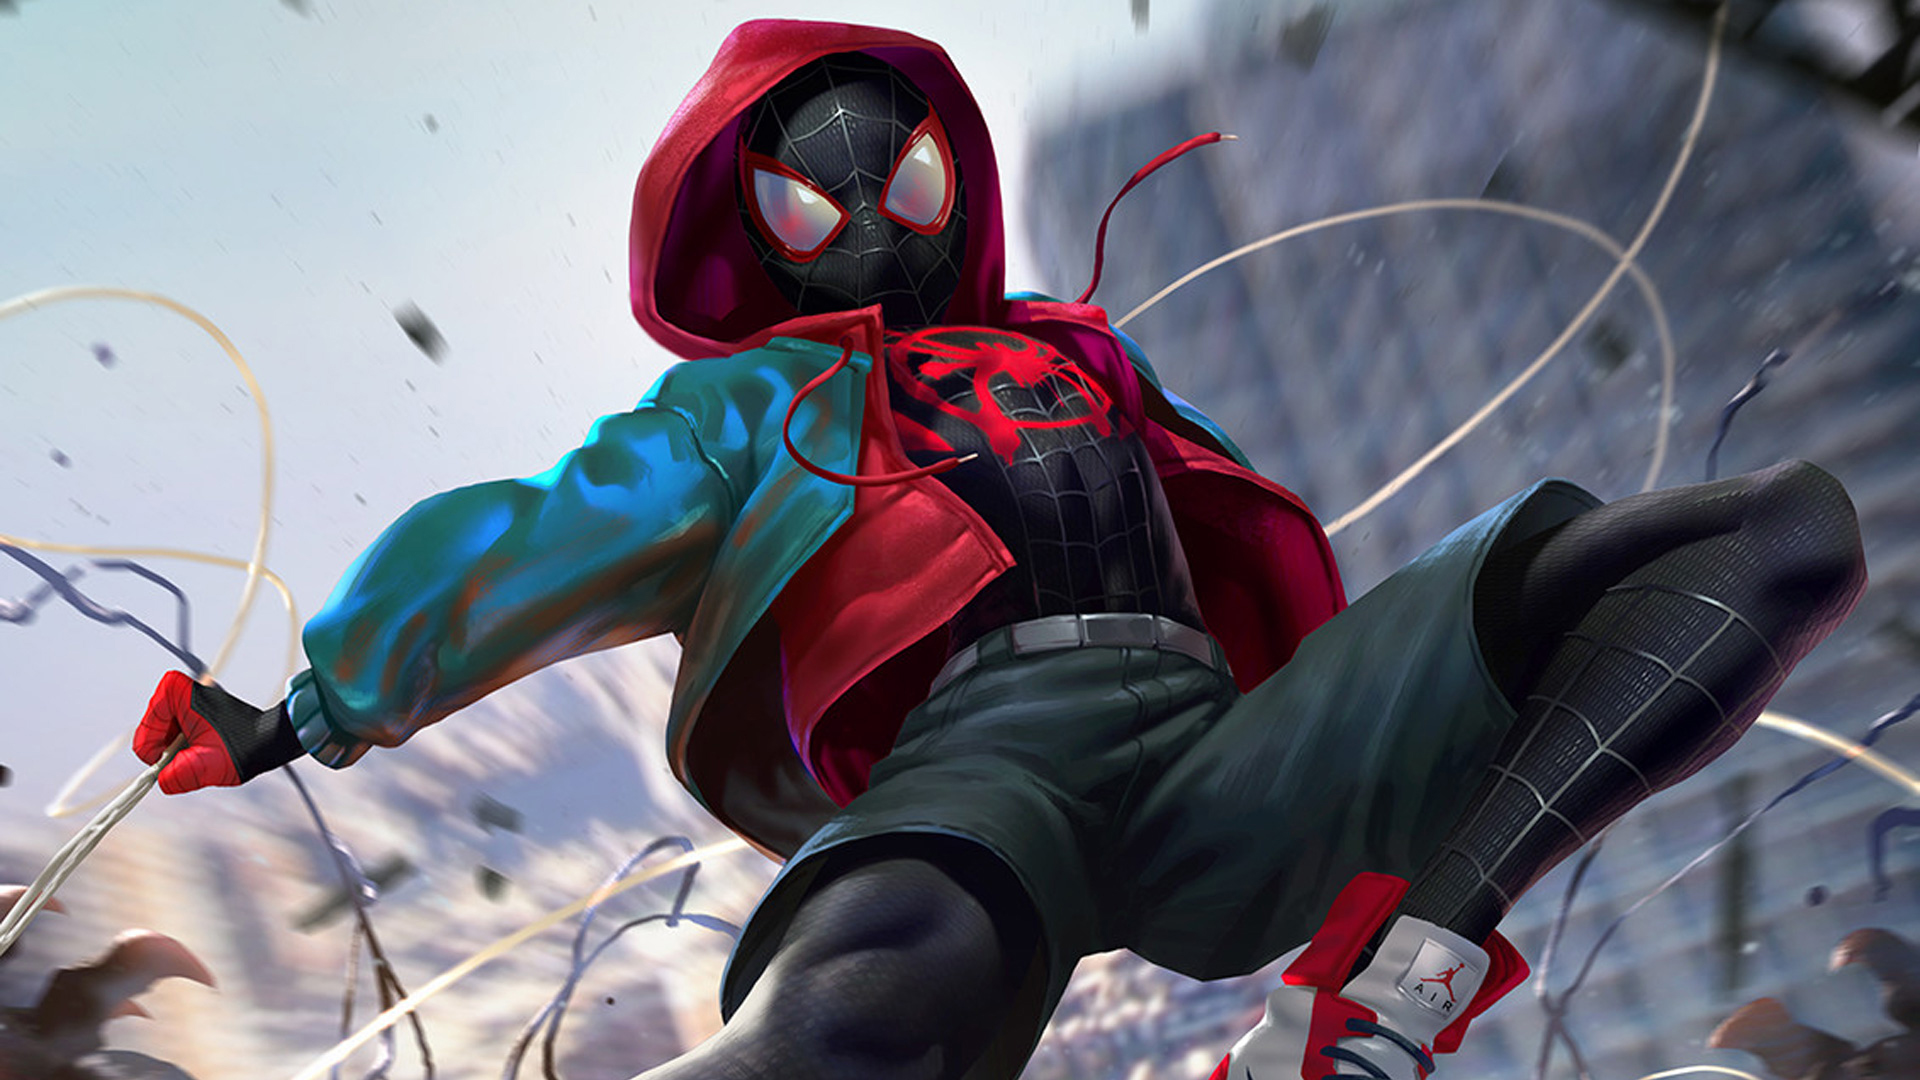 Spider Man Into The Spider Verse Miles Morales Wallpapers Hd Wallpapers We hope you enjoy our growing collection of hd images to use as a background or home screen for your smartphone or please contact us if you want to publish a miles morales wallpaper on our site. hd wallpapers